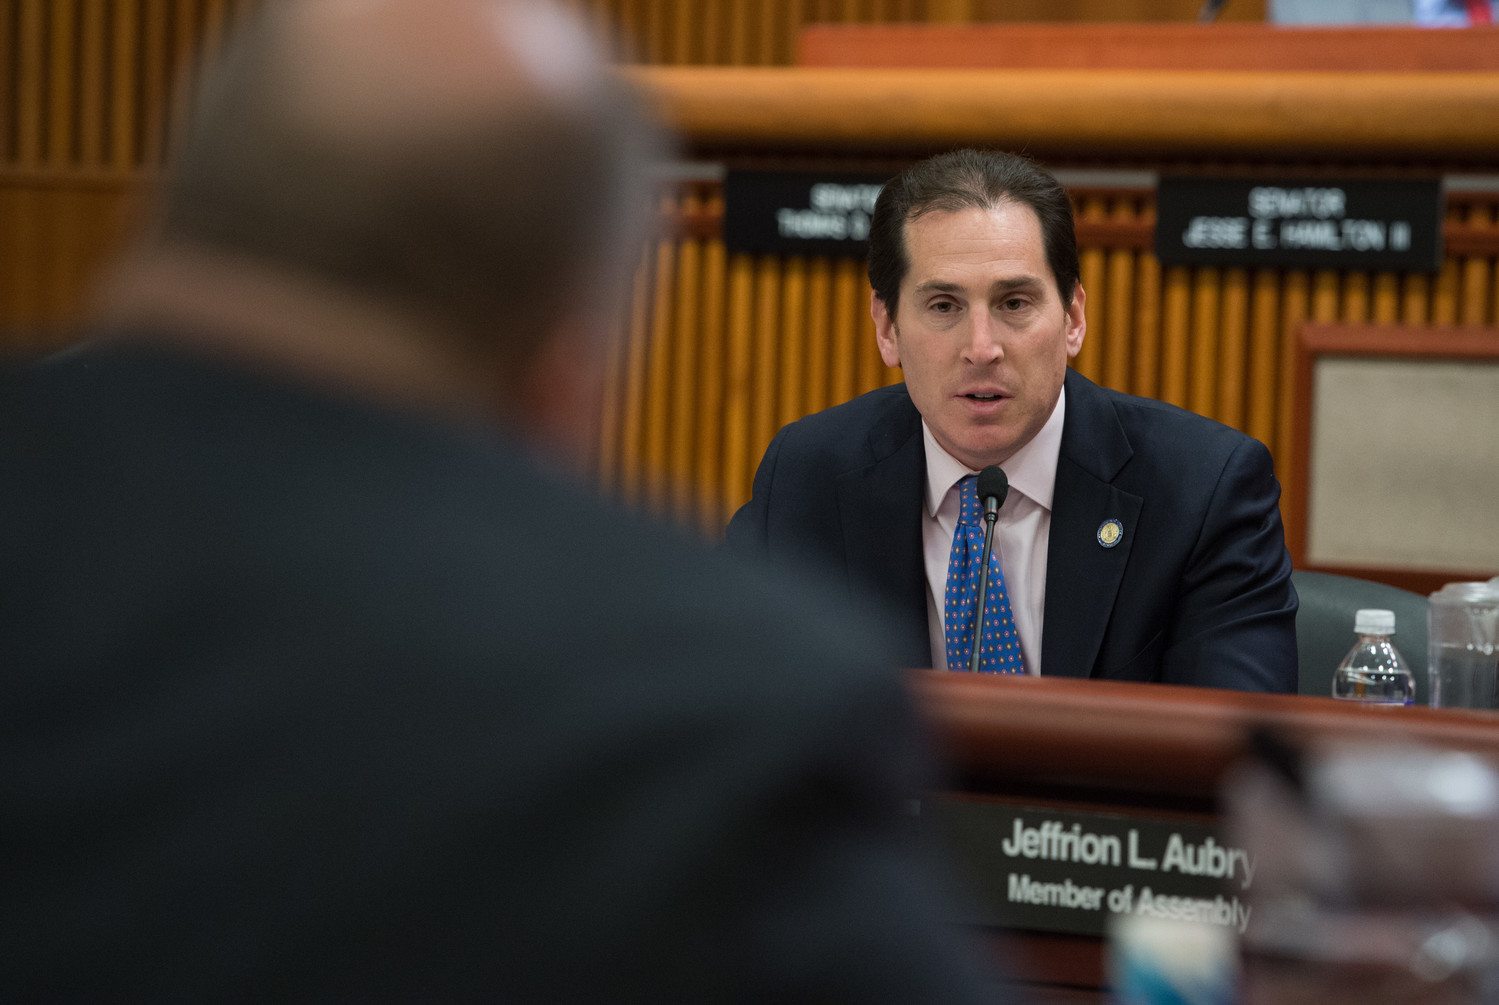 Sen. Todd Kaminsky pressed DHSES Commissioner Roger Perrino on the Senate floor over the lack of progress on the drainage project he oversees.